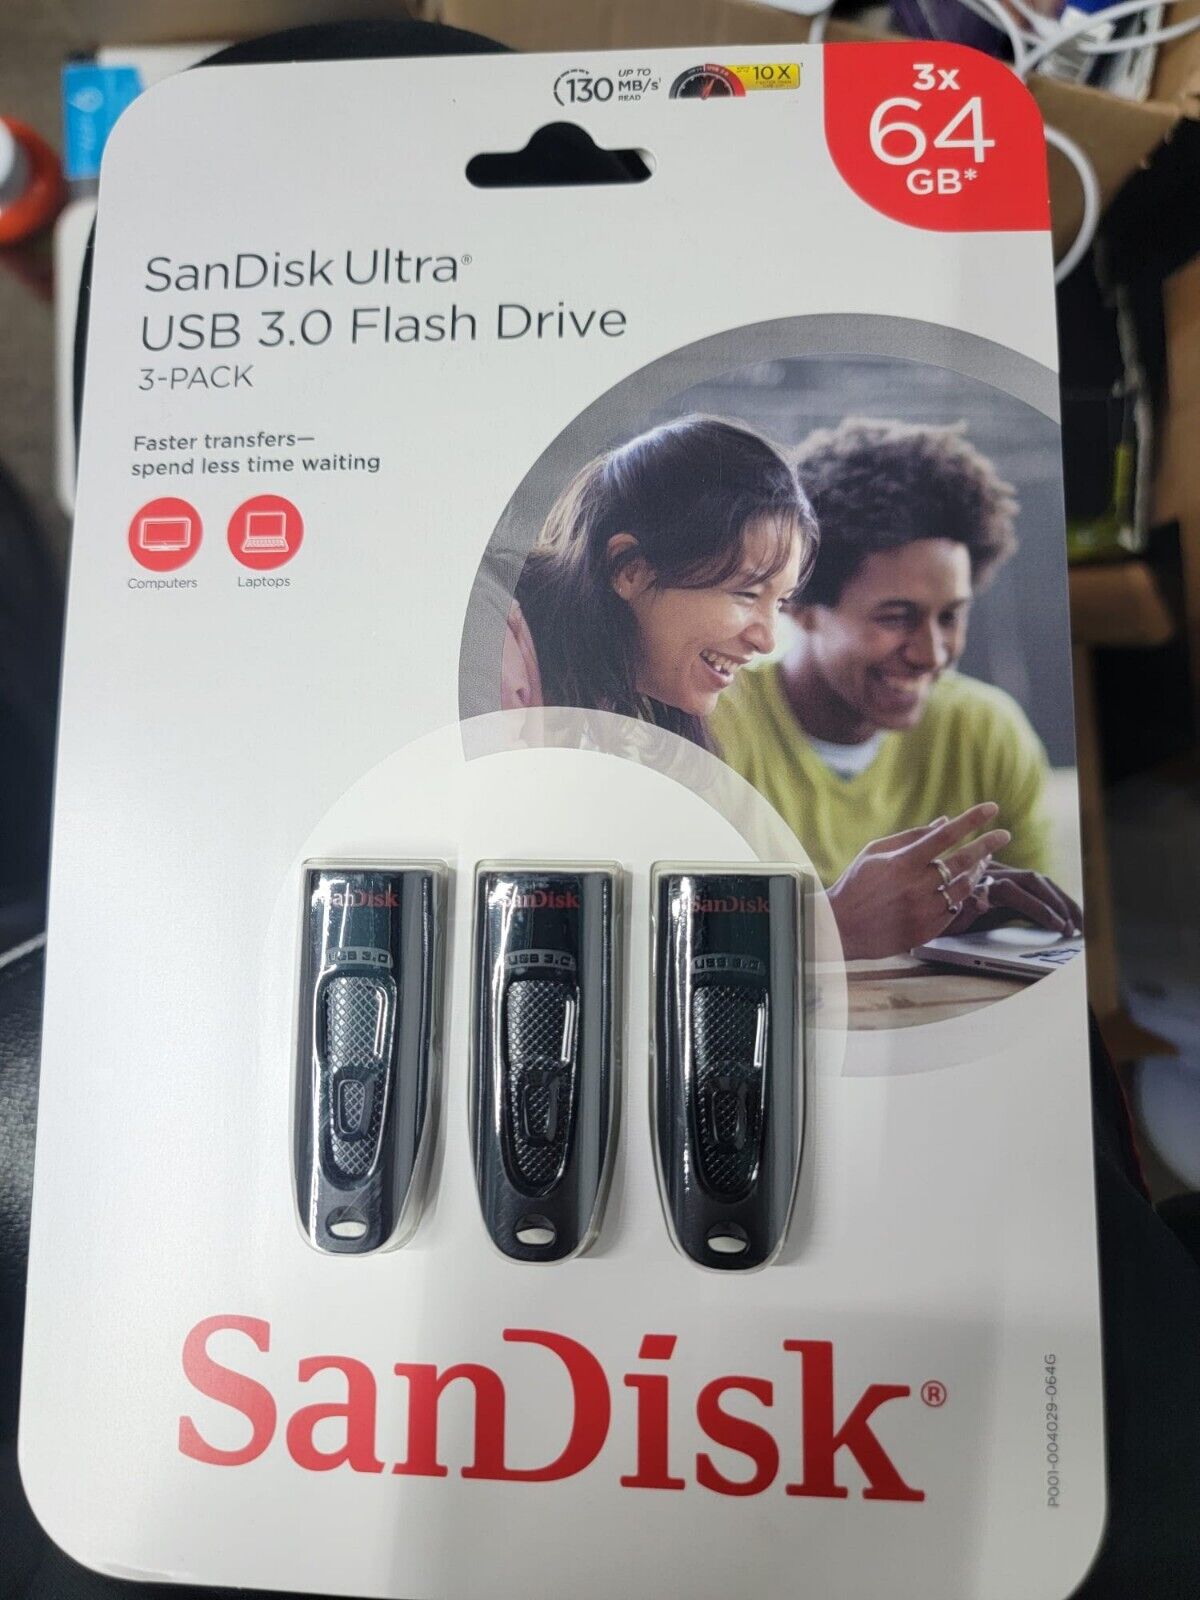 3 pack SanDisk 64gb USB 3.0 Flash Drive Total 192Gb New in Retail Package